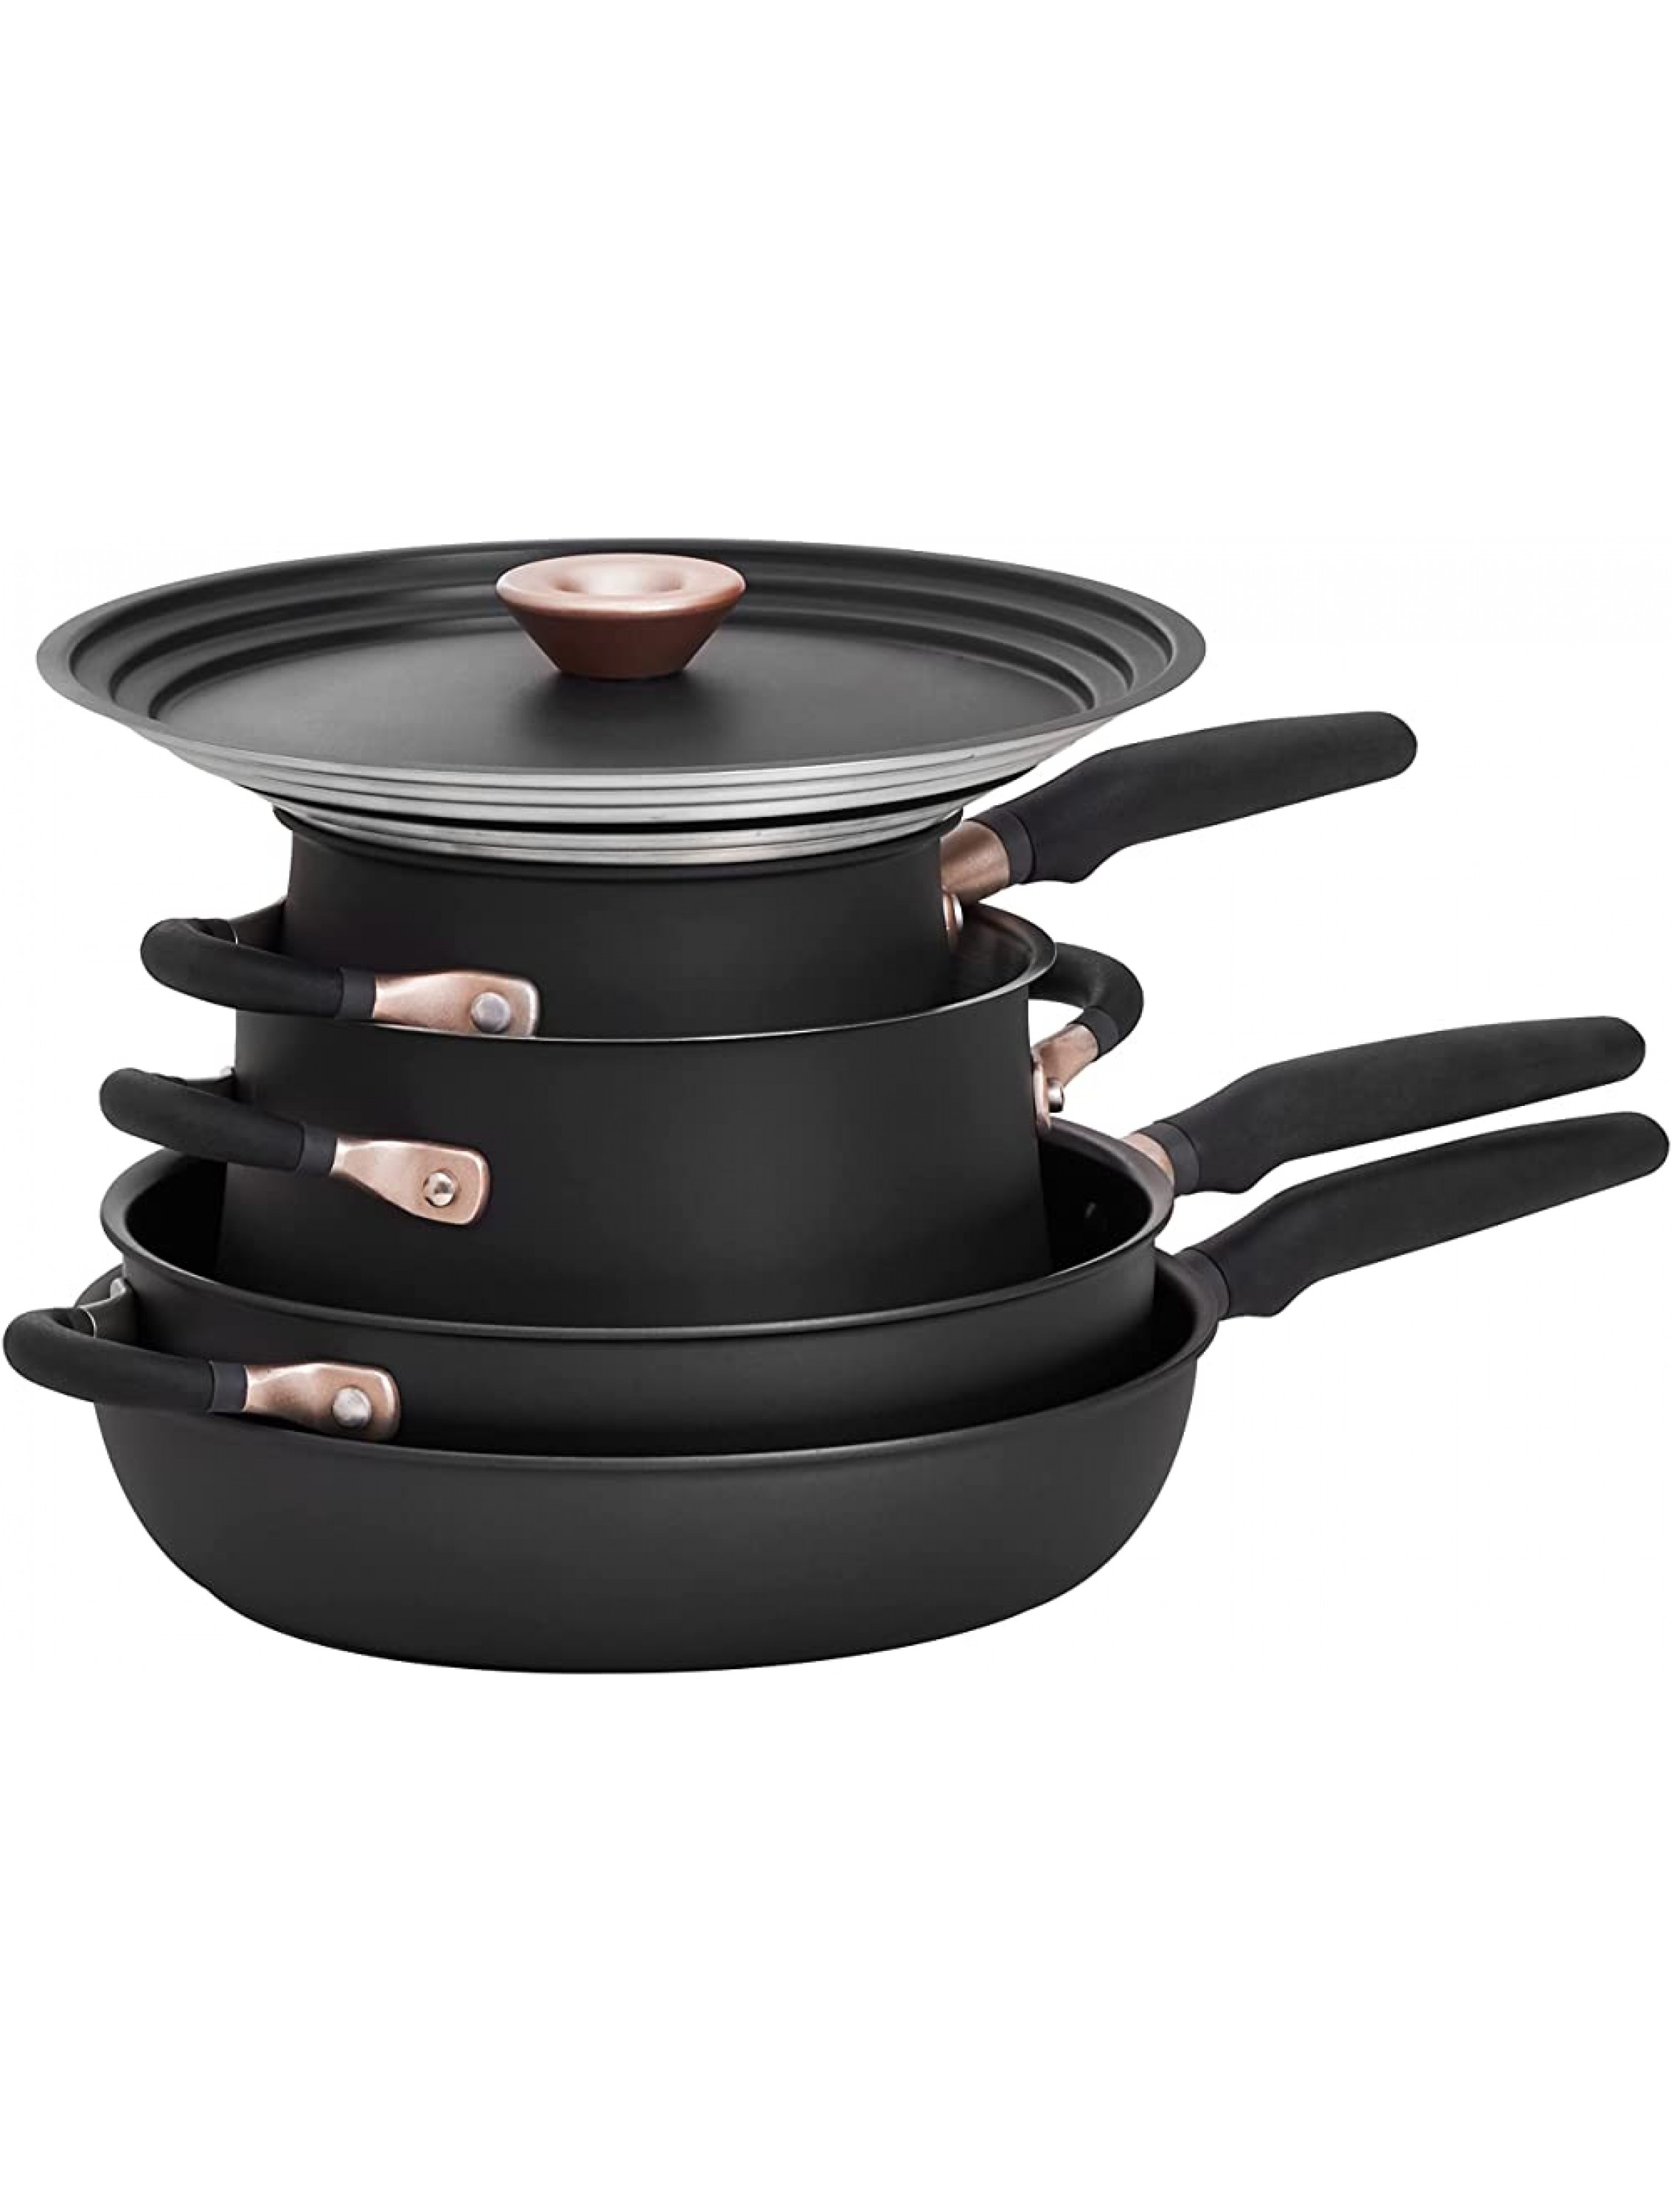 Meyer Accent Series Hard Anodized Nonstick and Stainless Steel Pots and Pans Essential Cookware Set 6 Piece Matte Black - BN42MGQ8Q